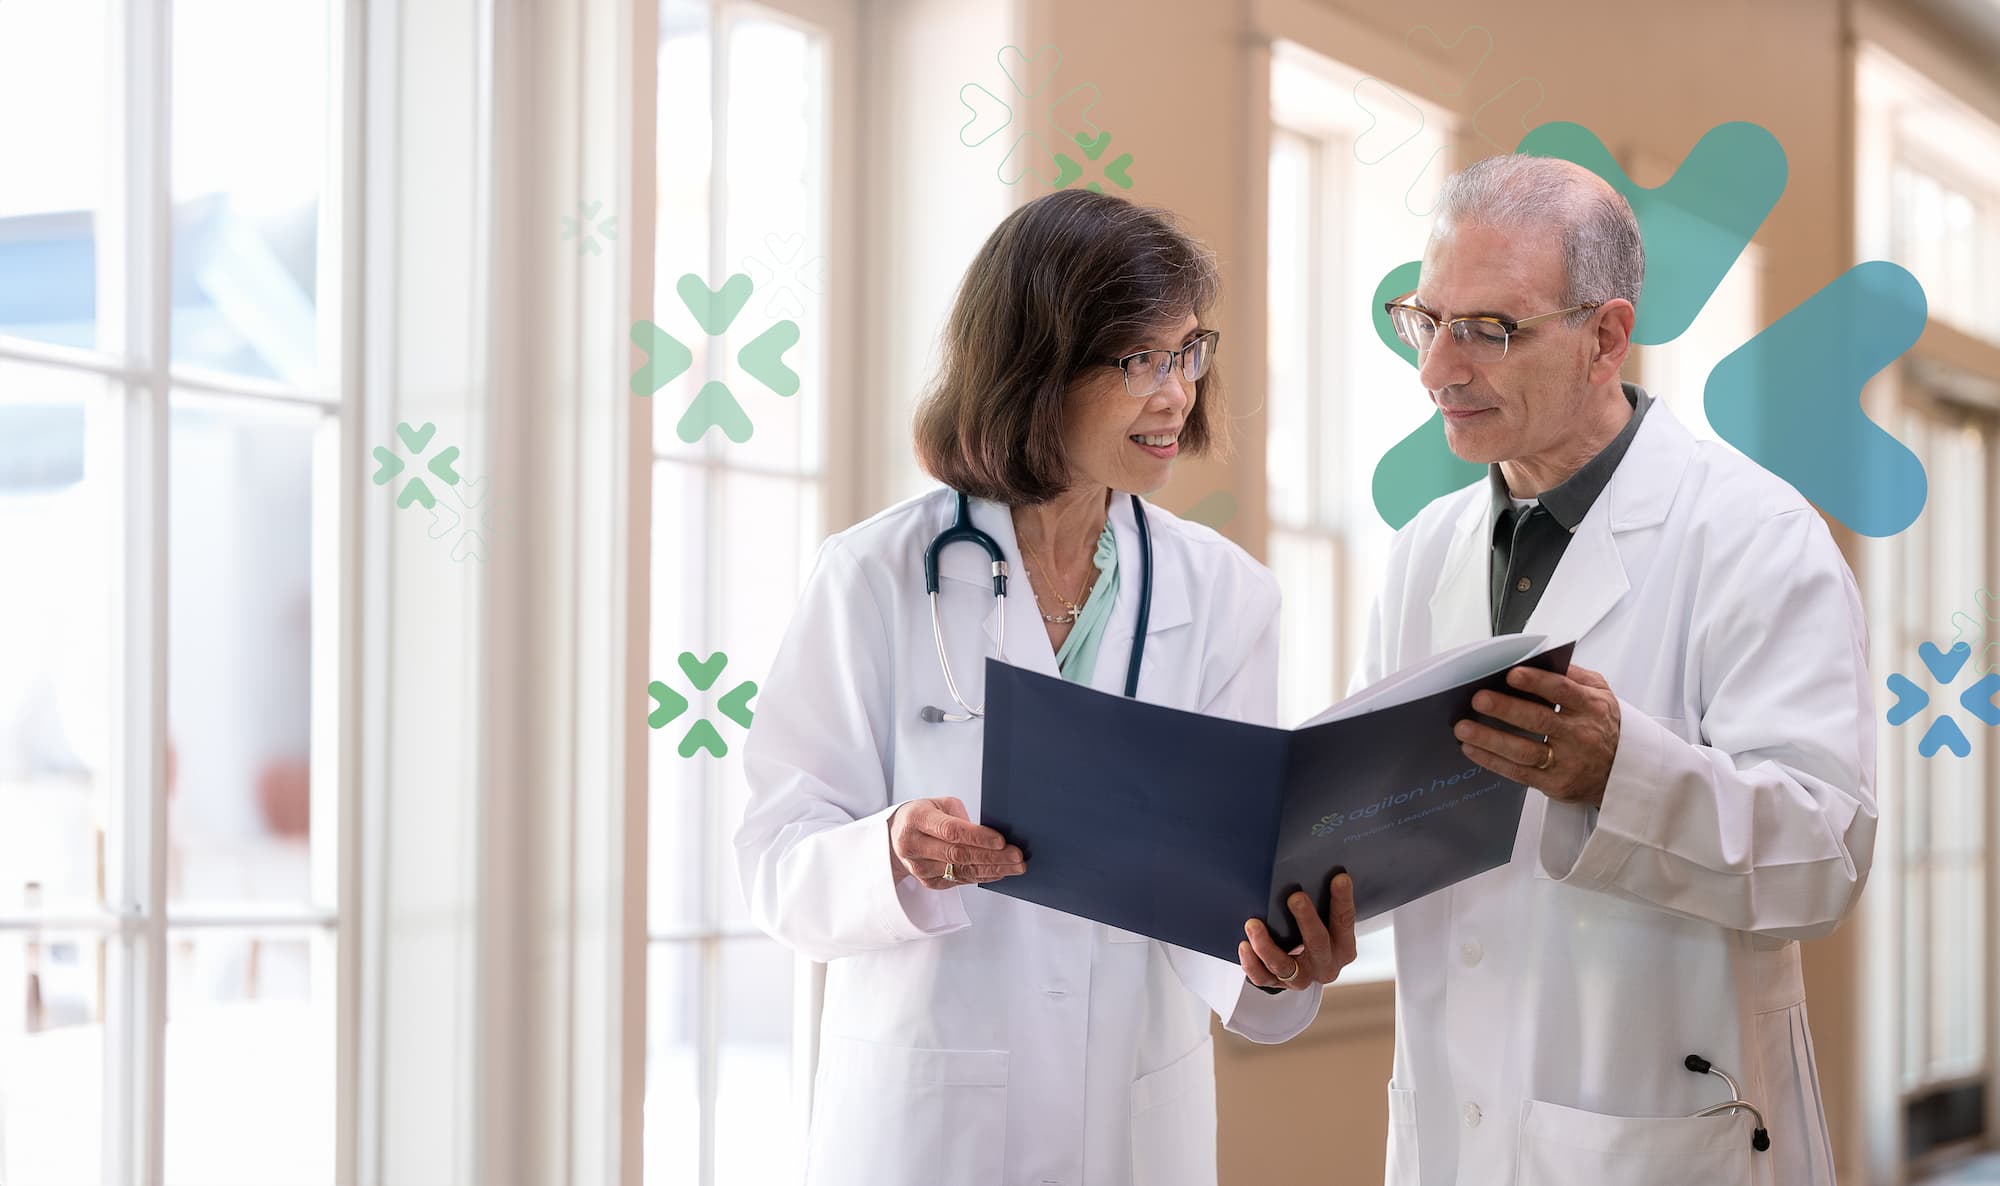 Generic stock photo of two doctors with agilon related branding on it.